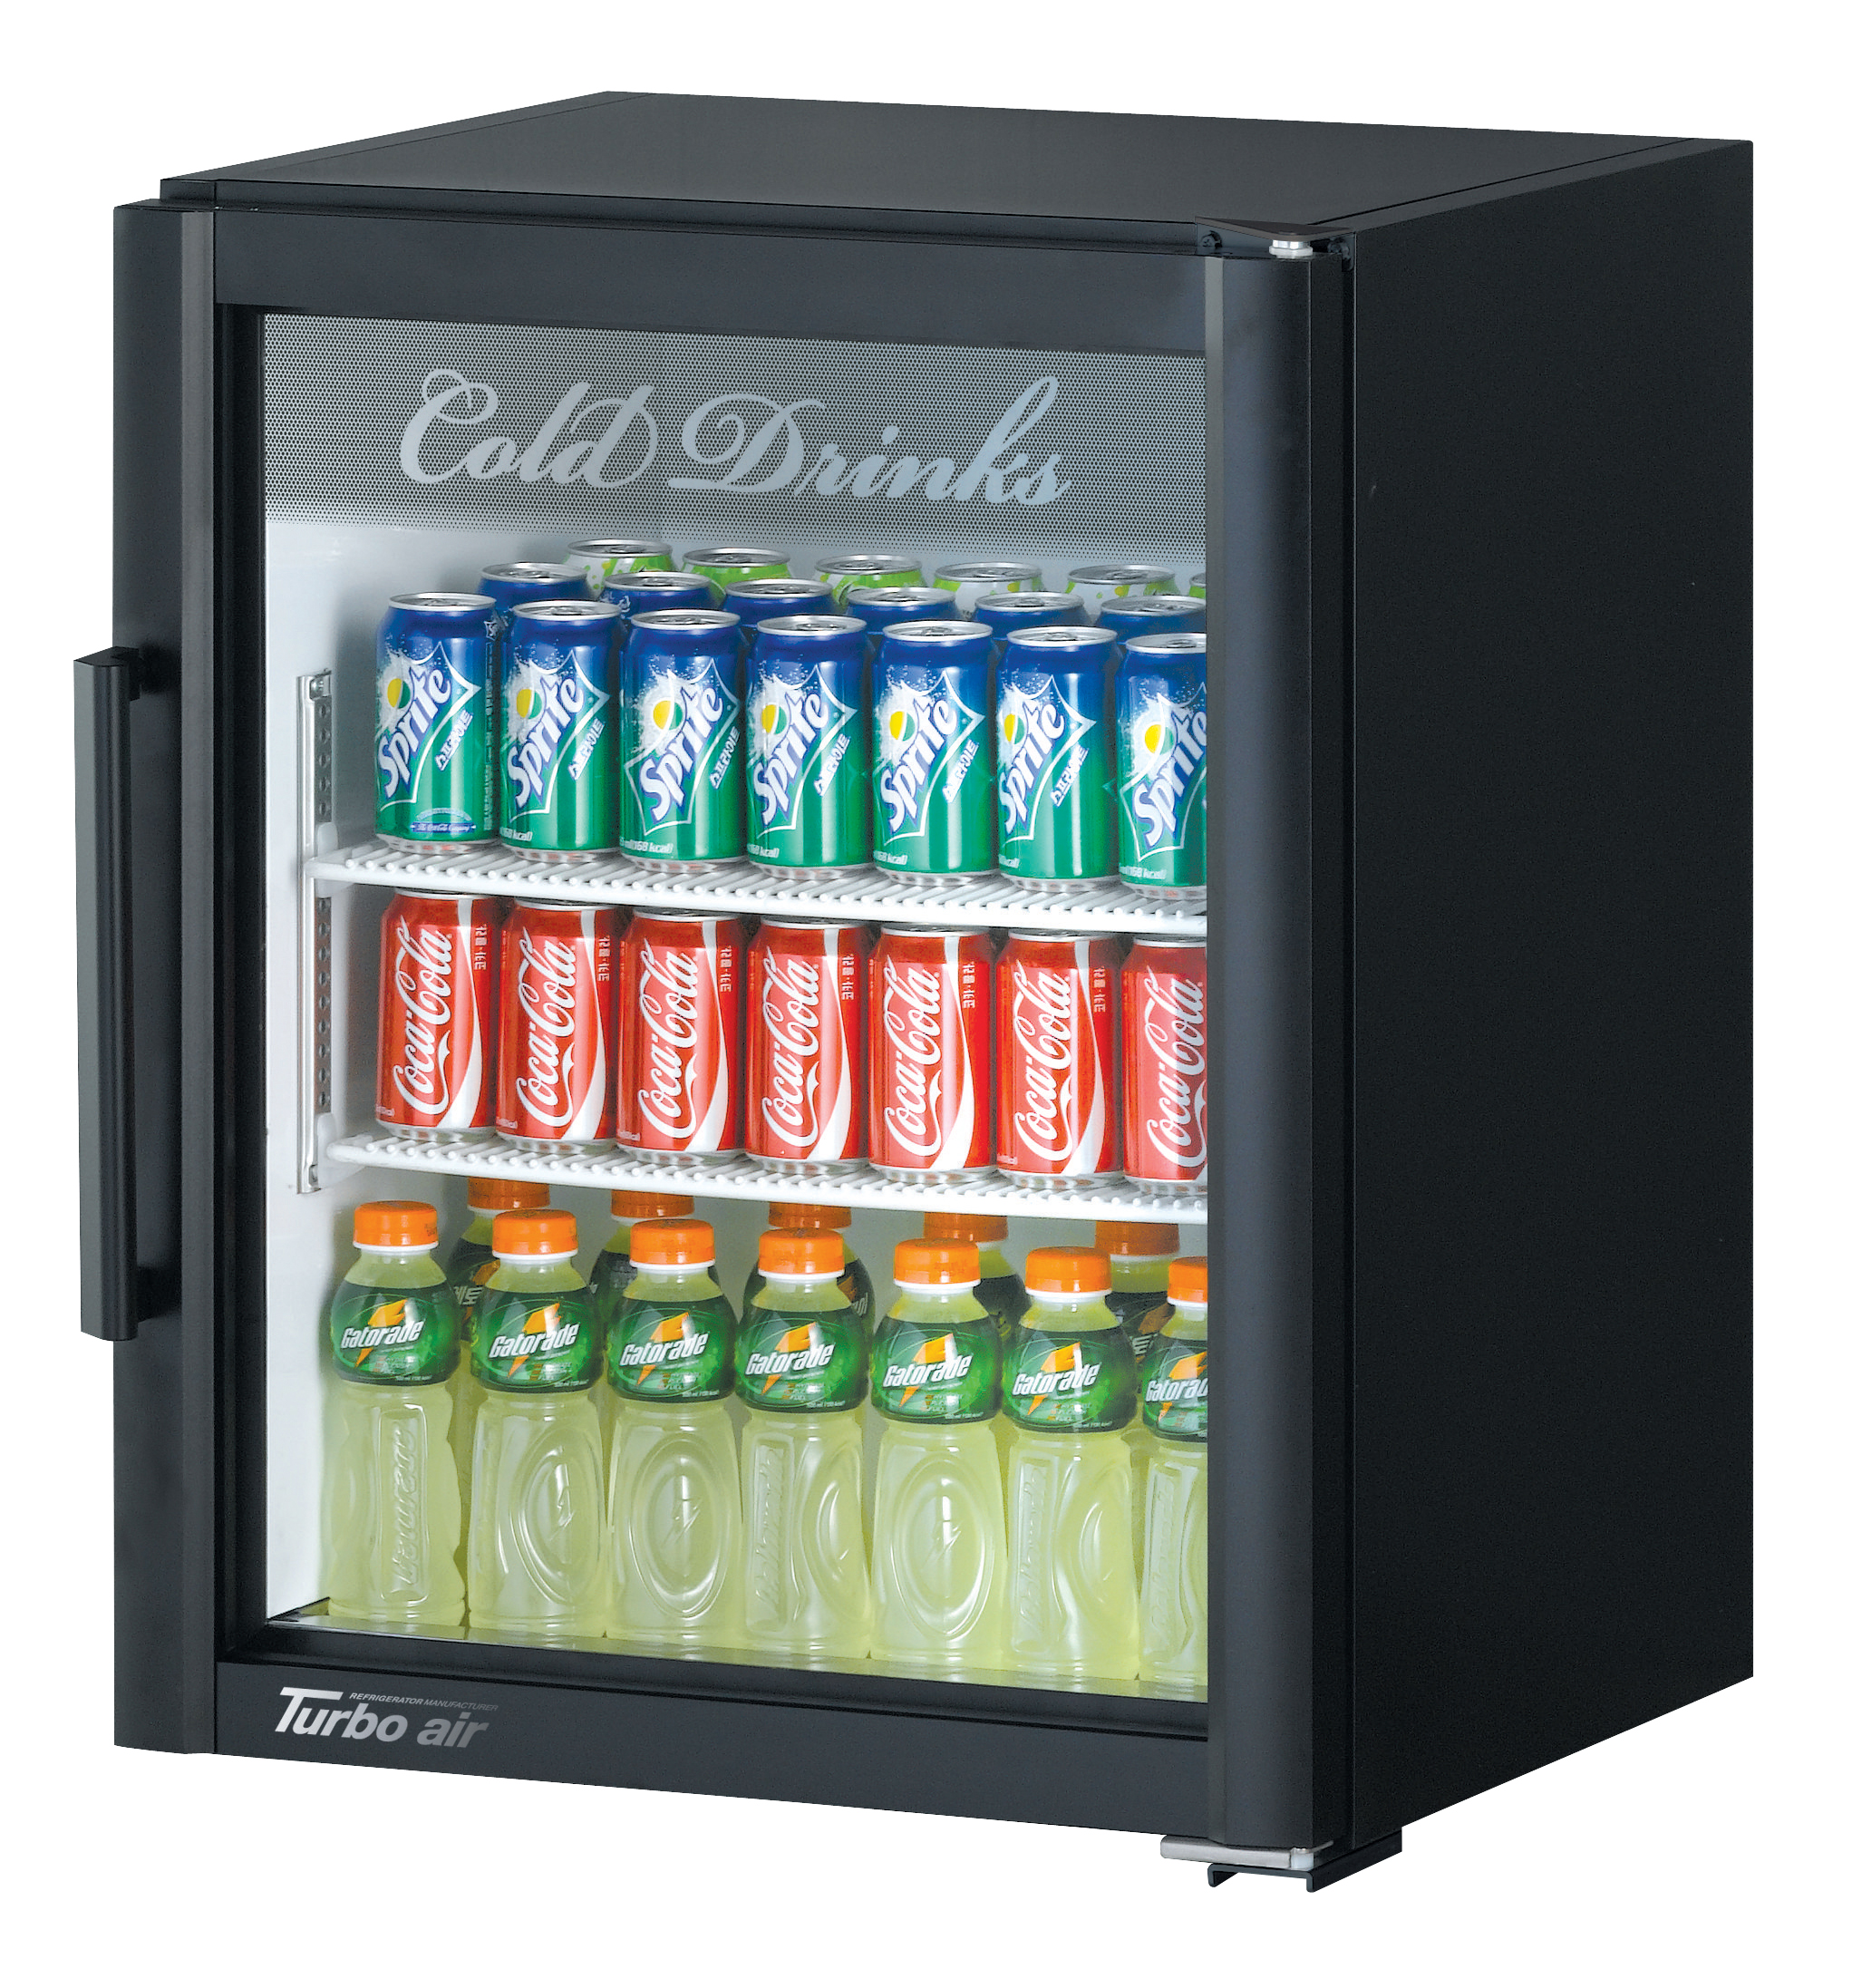 Super Deluxe Refrigerated Merchandiser, one-section